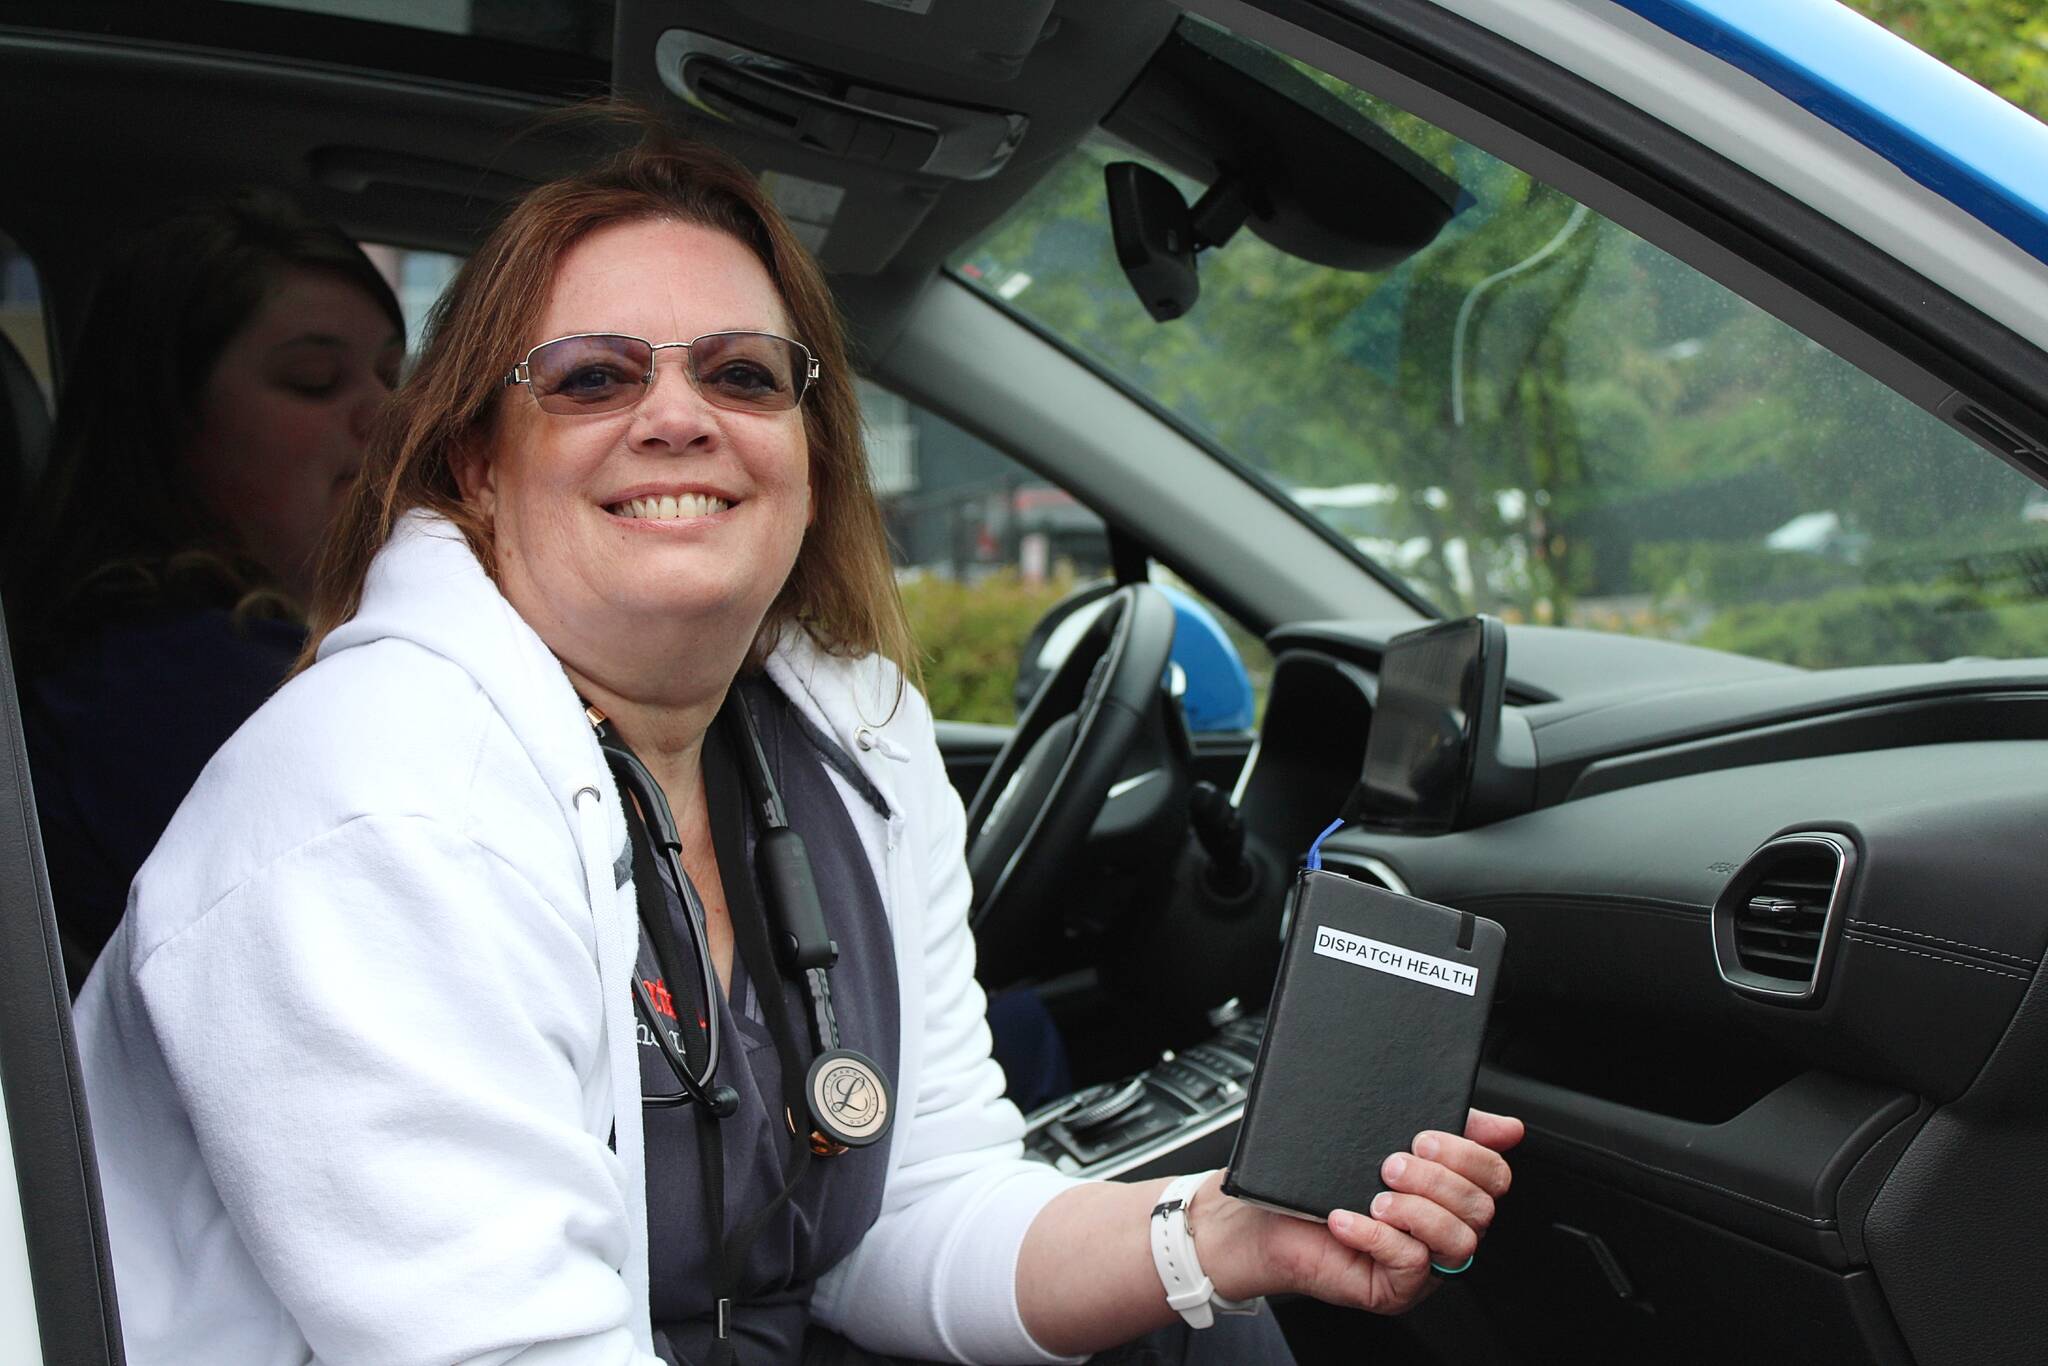 Nurse practitioner Sirena Sagdahl holds her black book of resources she carries while visiting patients through Dispatch Health. She and Sierra Berry, a Dispatch Health medical technician, teamed up the morning of July 21 to visit patients for the day. (Alex Bruell / The Mirror)